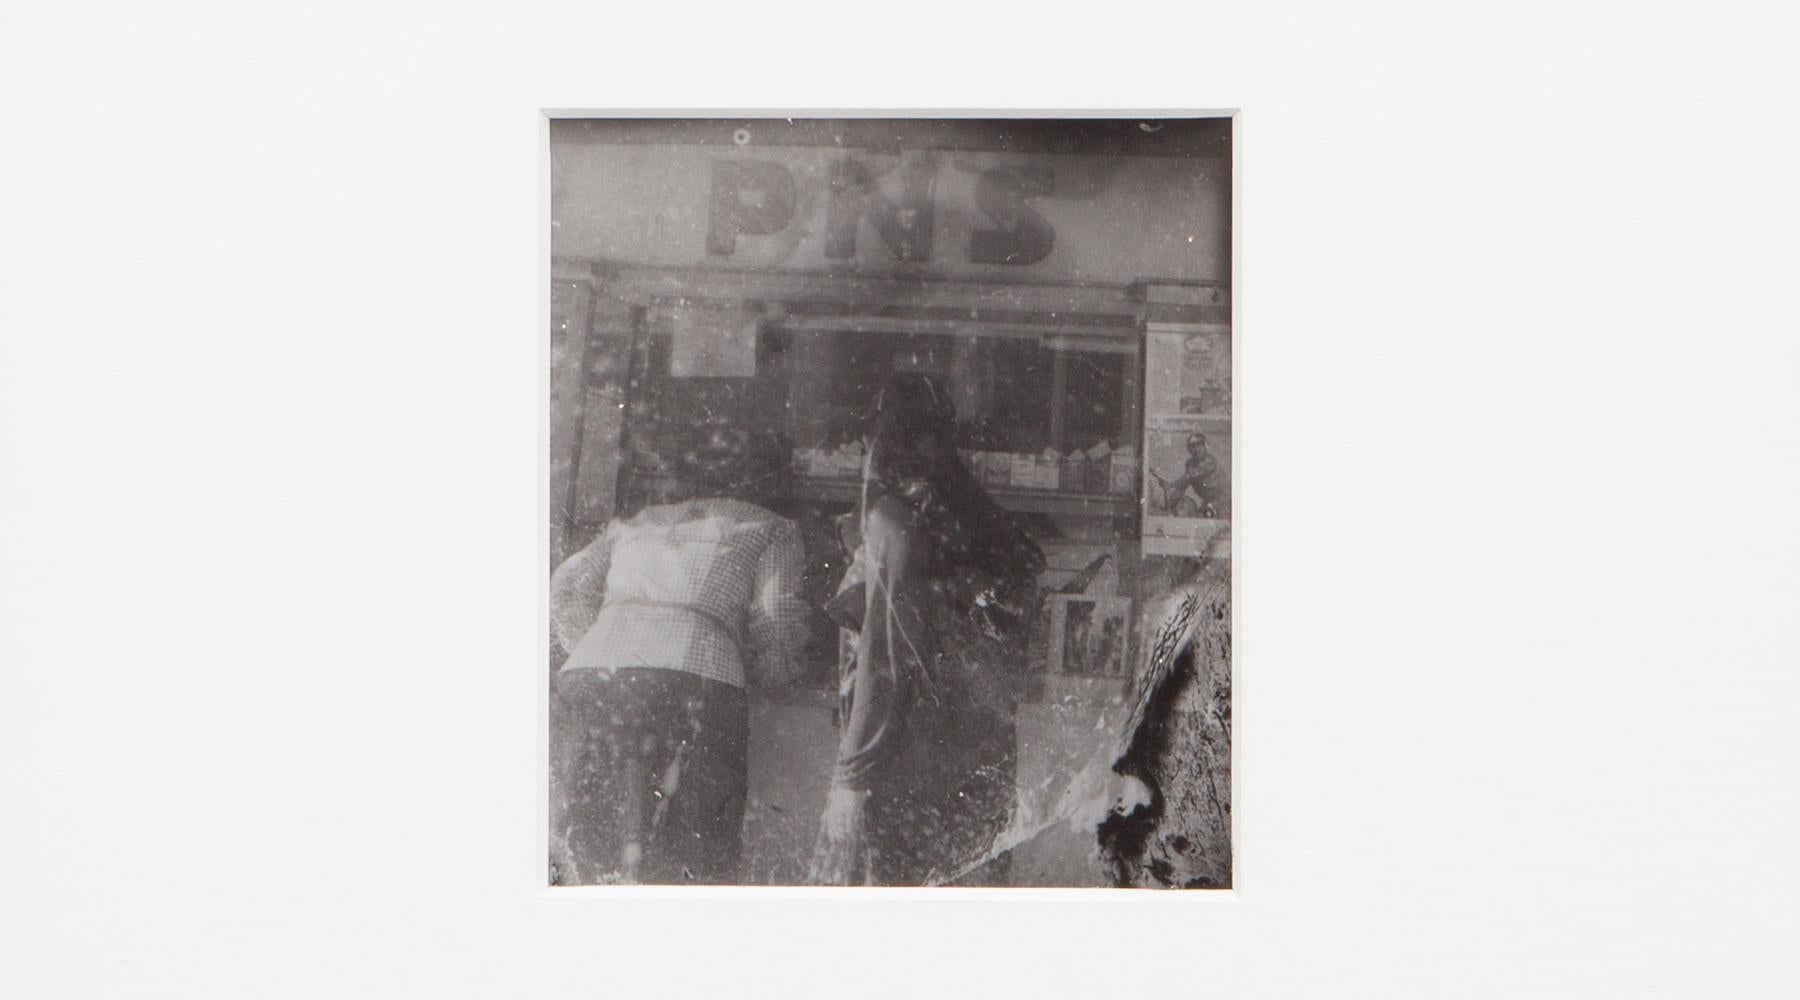 Original Miroslav Tichý b/w Photography from 1970. Unique vintage gelatin silver print. Including black wooden frame in H 27 / W 25.5 cm. This original Miroslav Tichý motif depicts two women photographed from behind while shopping. 

Miroslav Tichý